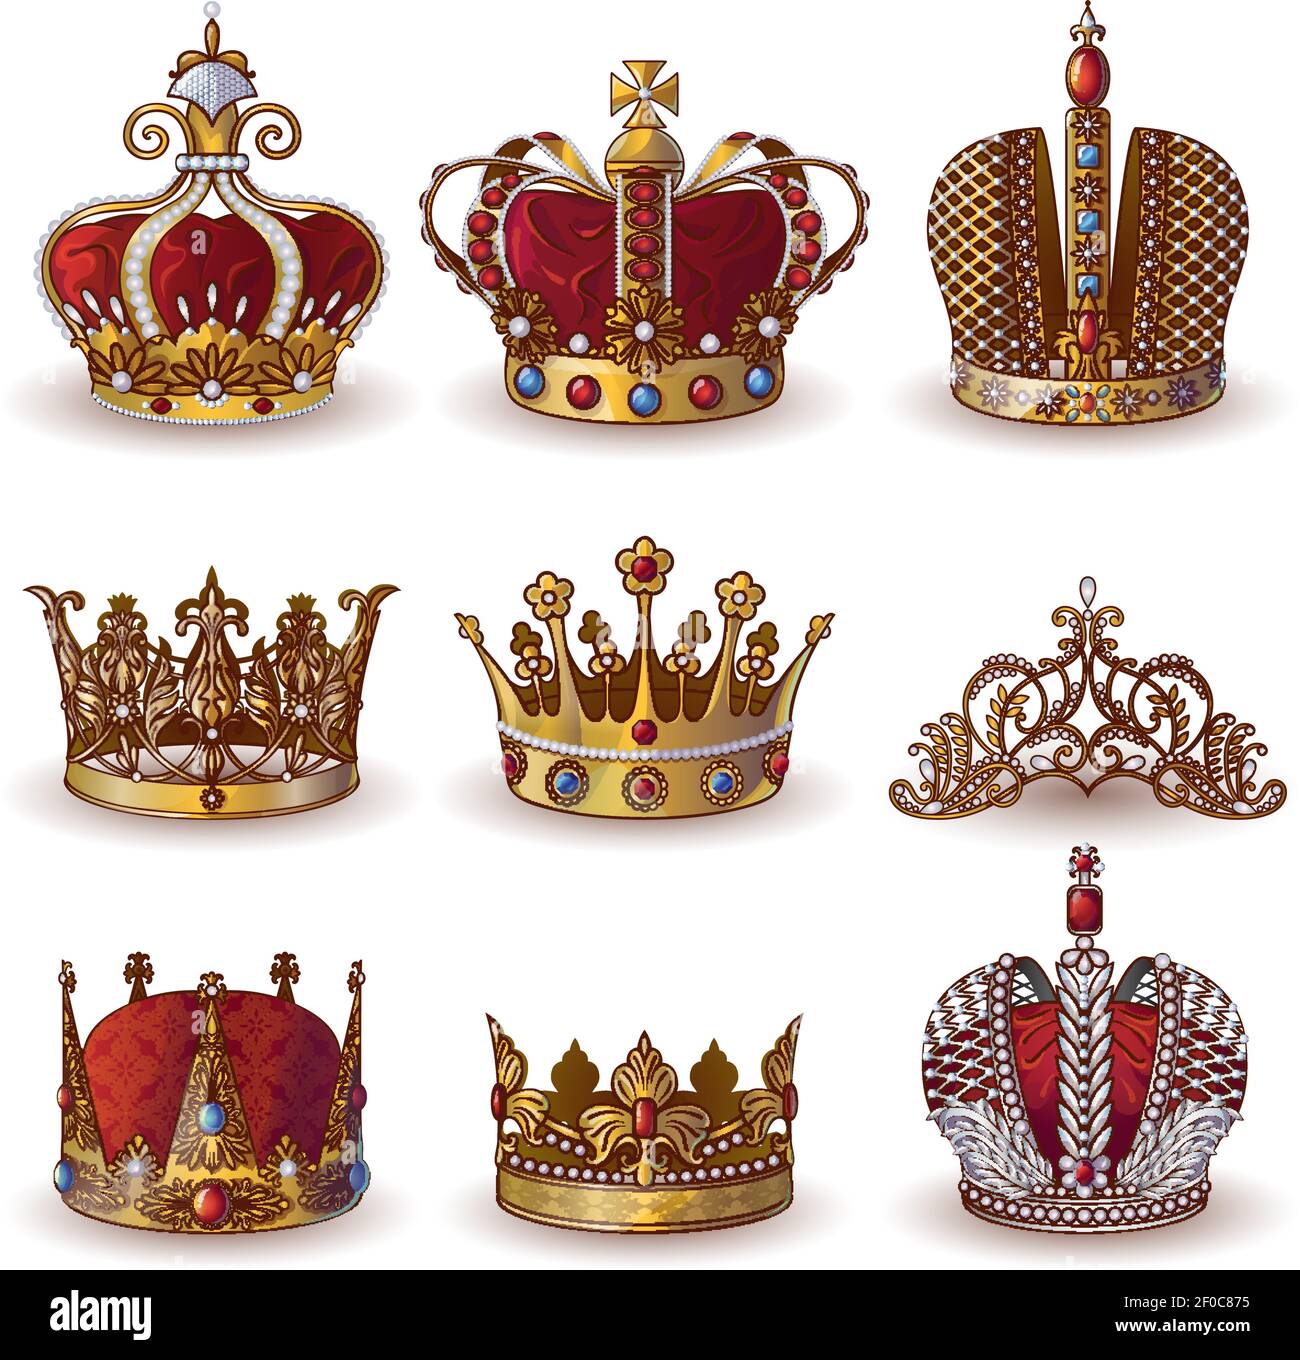 Royal crowns collection of gold and silver jewelry of different types ...